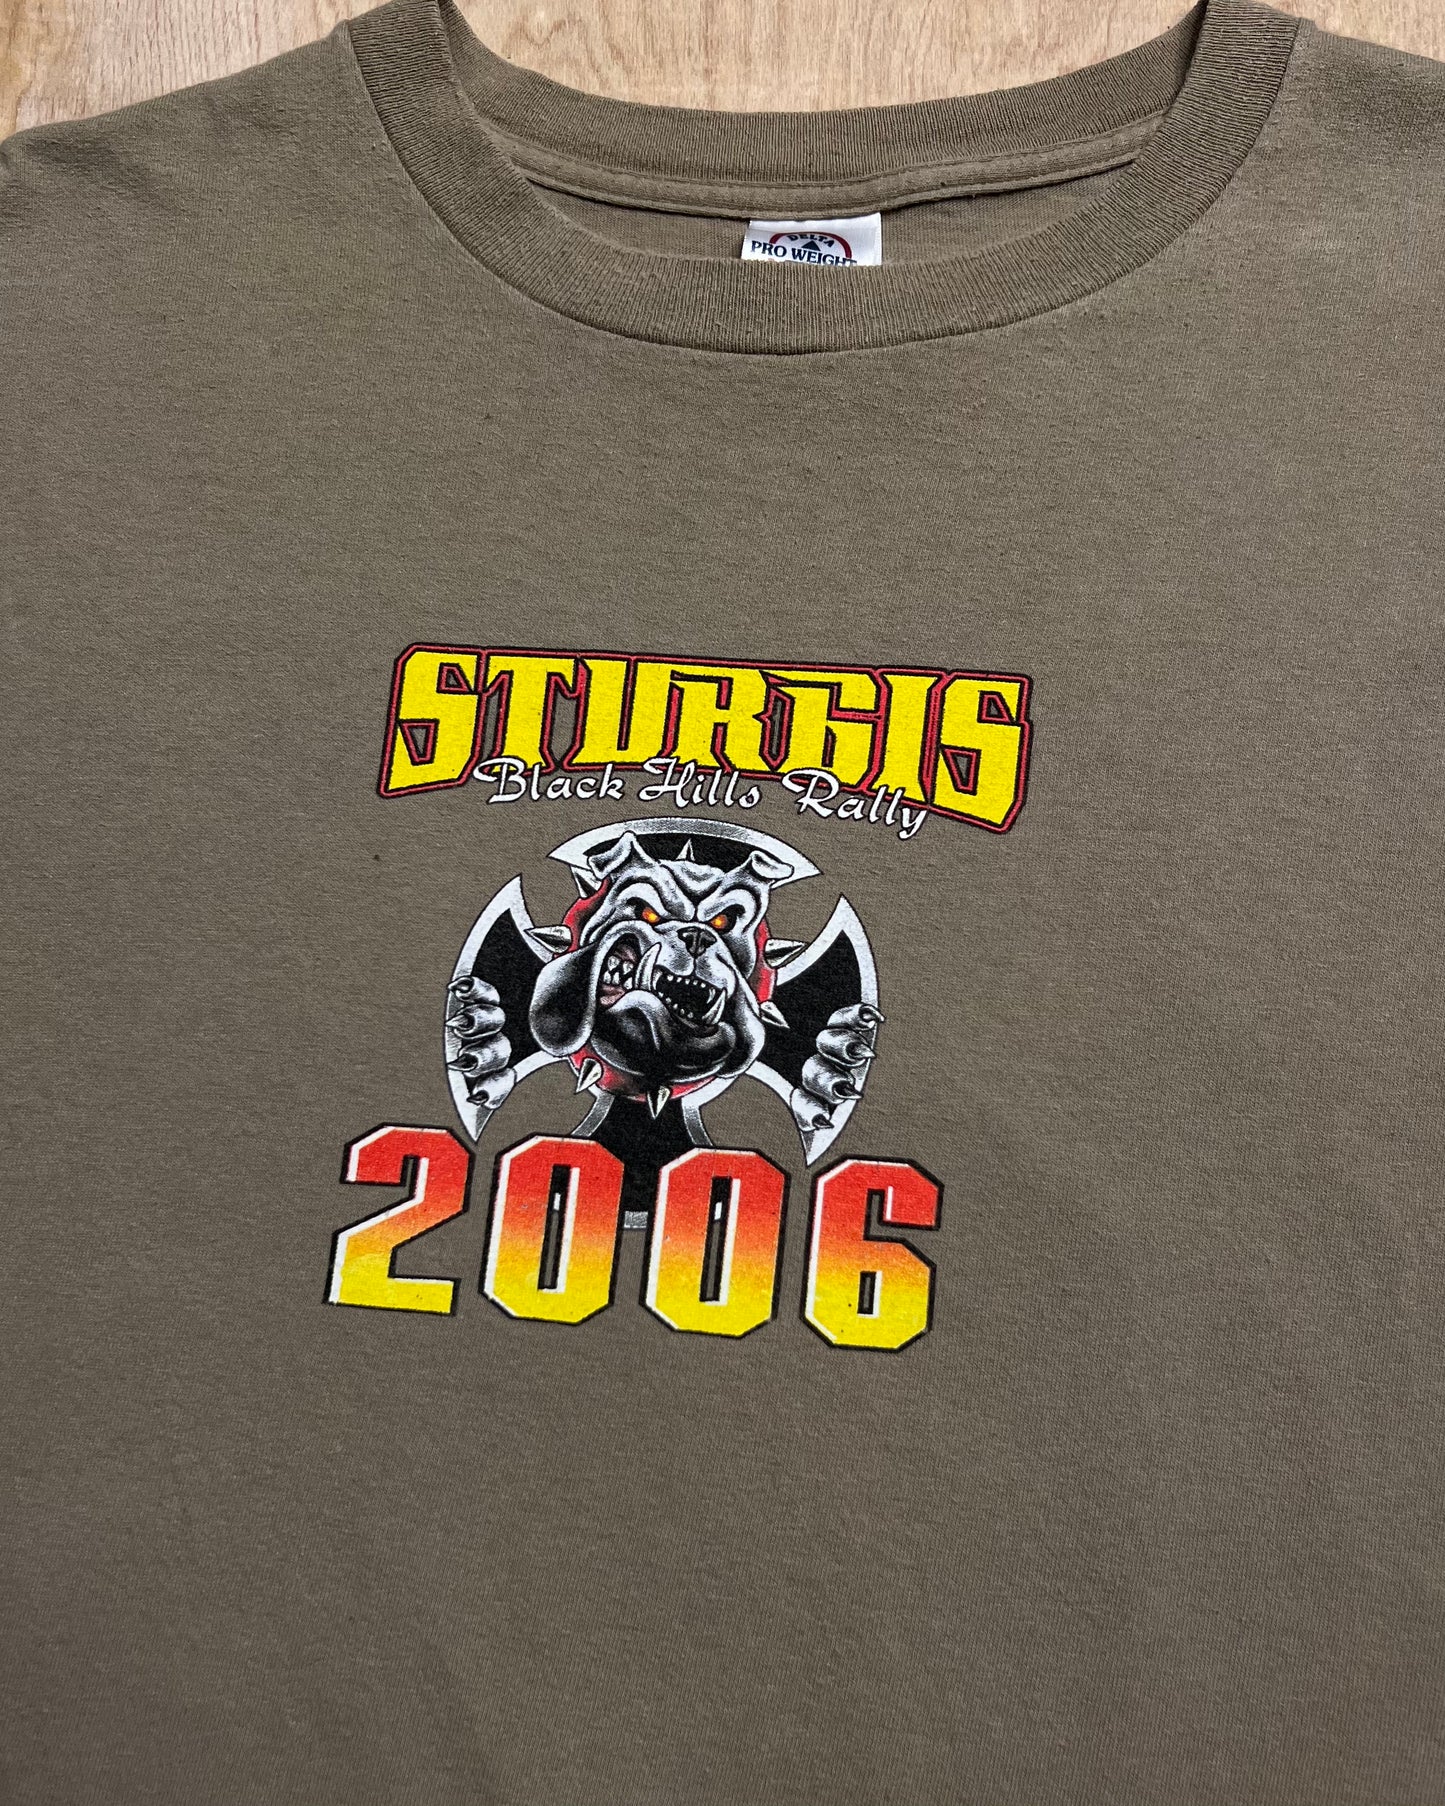 2006 Sturgis Black Hills Rally "Does Not Play Well With Other" T-Shirt